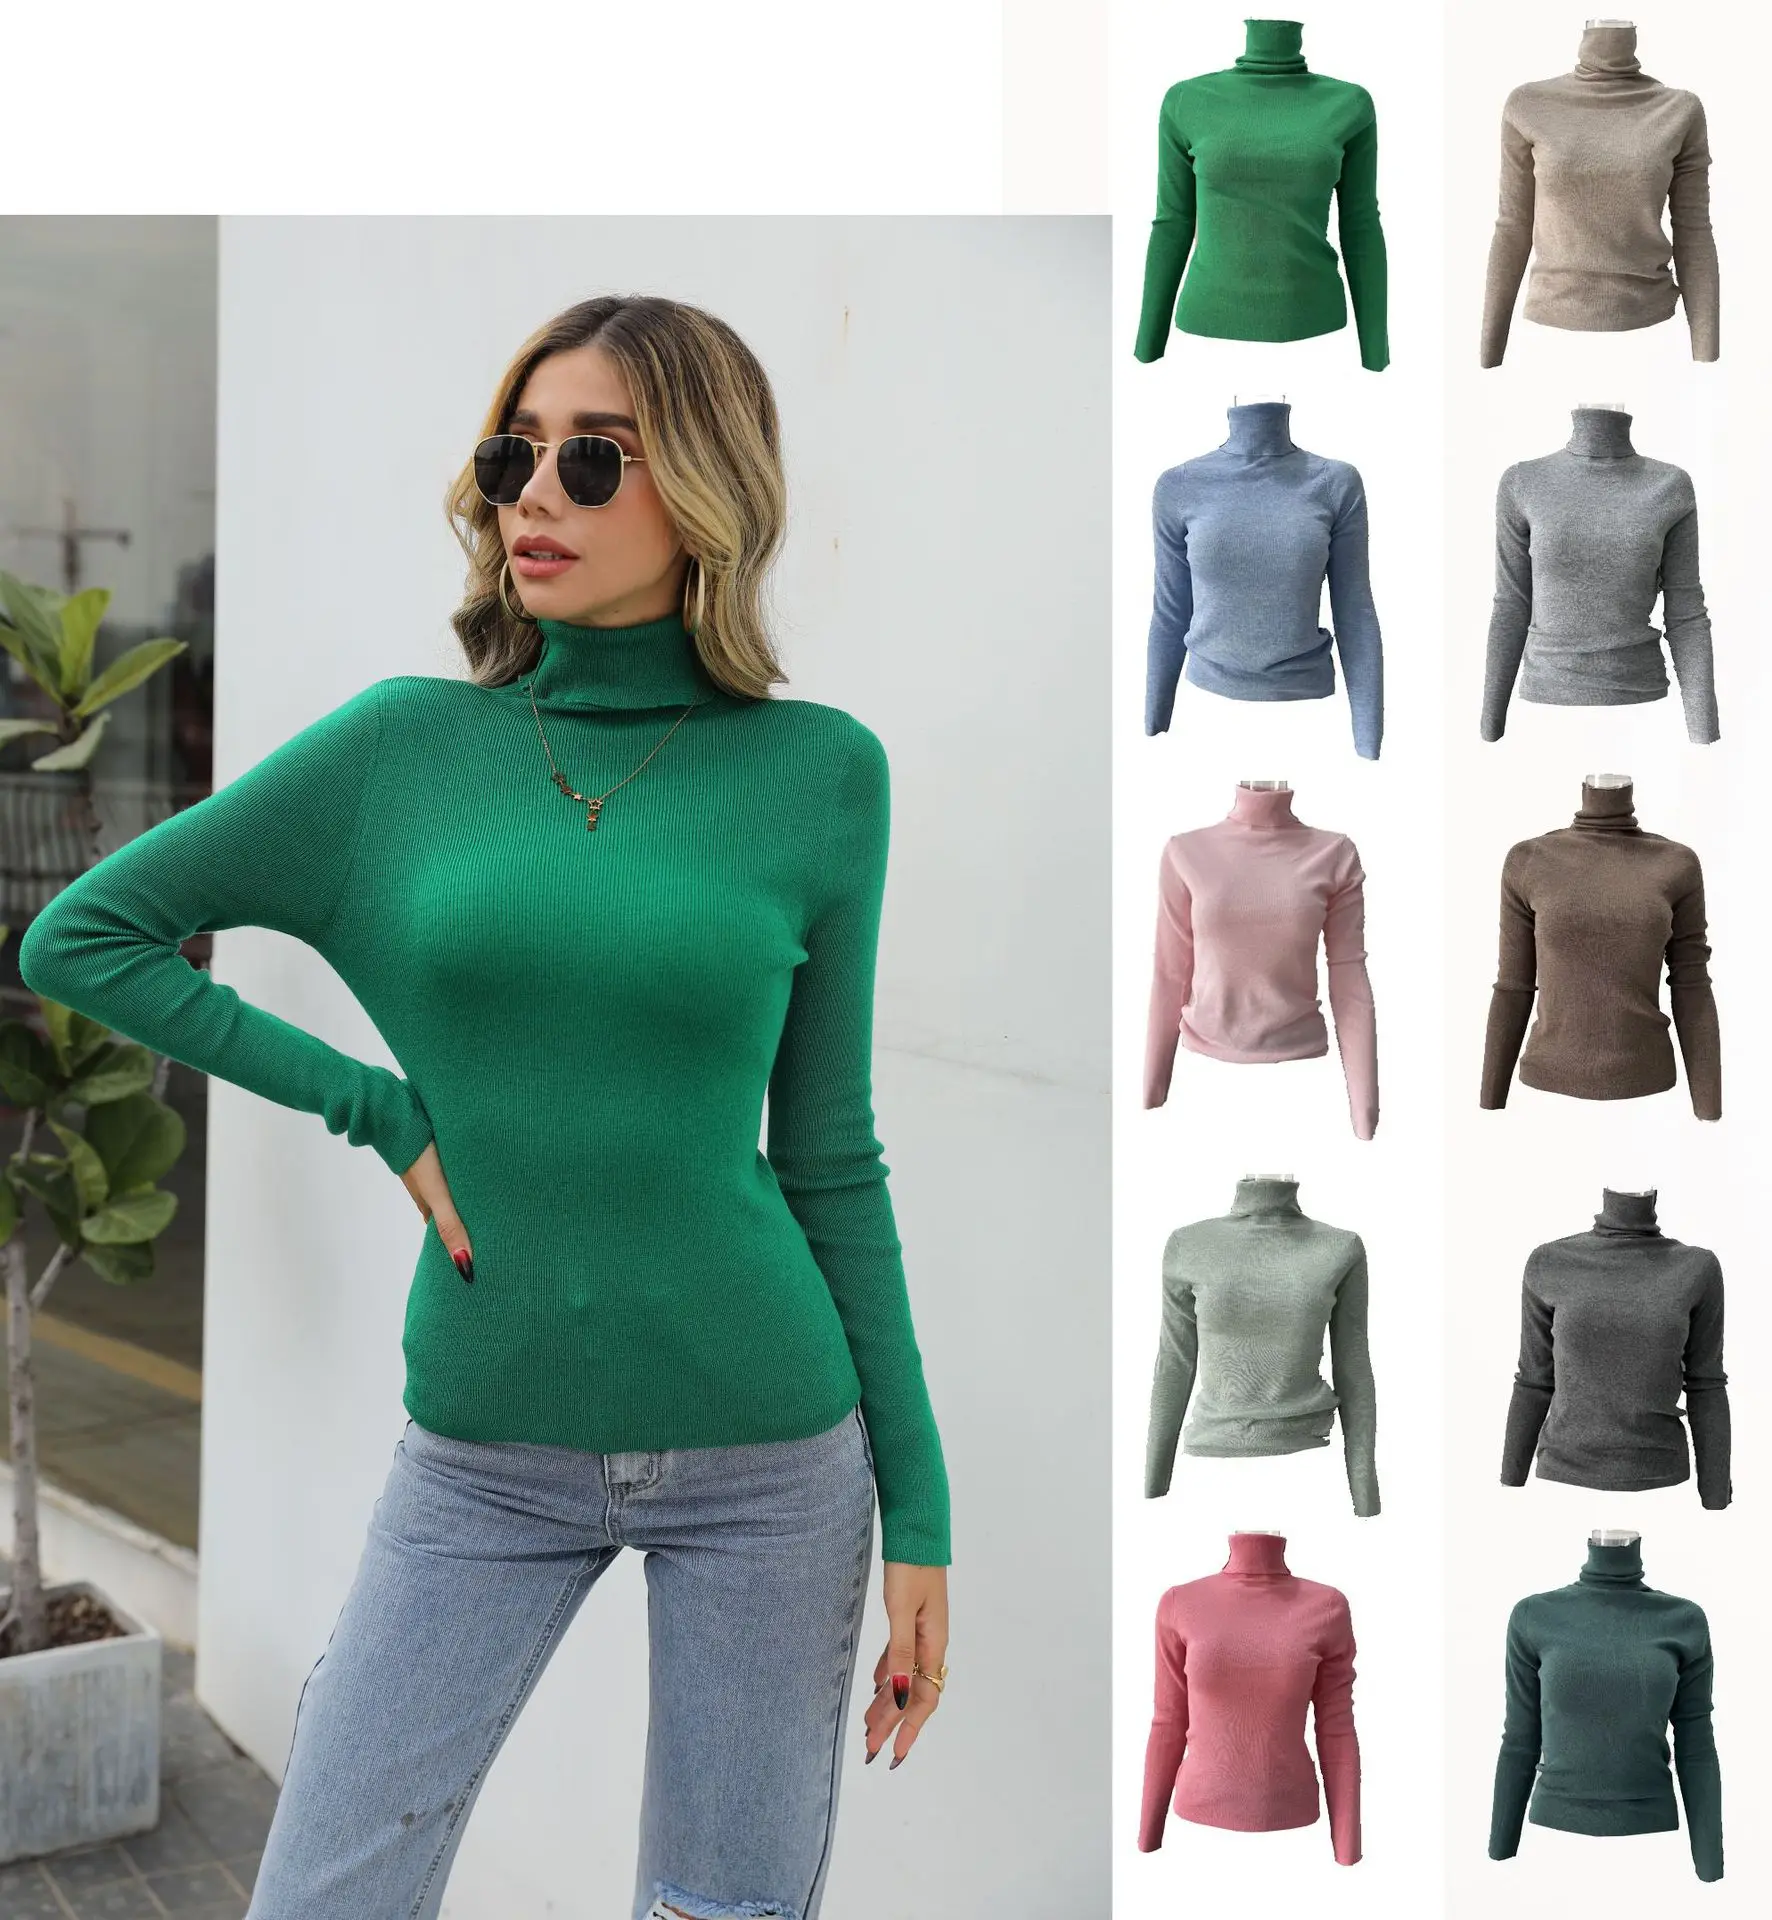 

Cos Women Must Have Bottoming Sweaters Pullover Knit Tops Shirts Basic Wool Blend Turtleneck Sweater, White,black,green,camel,light pink,black green...